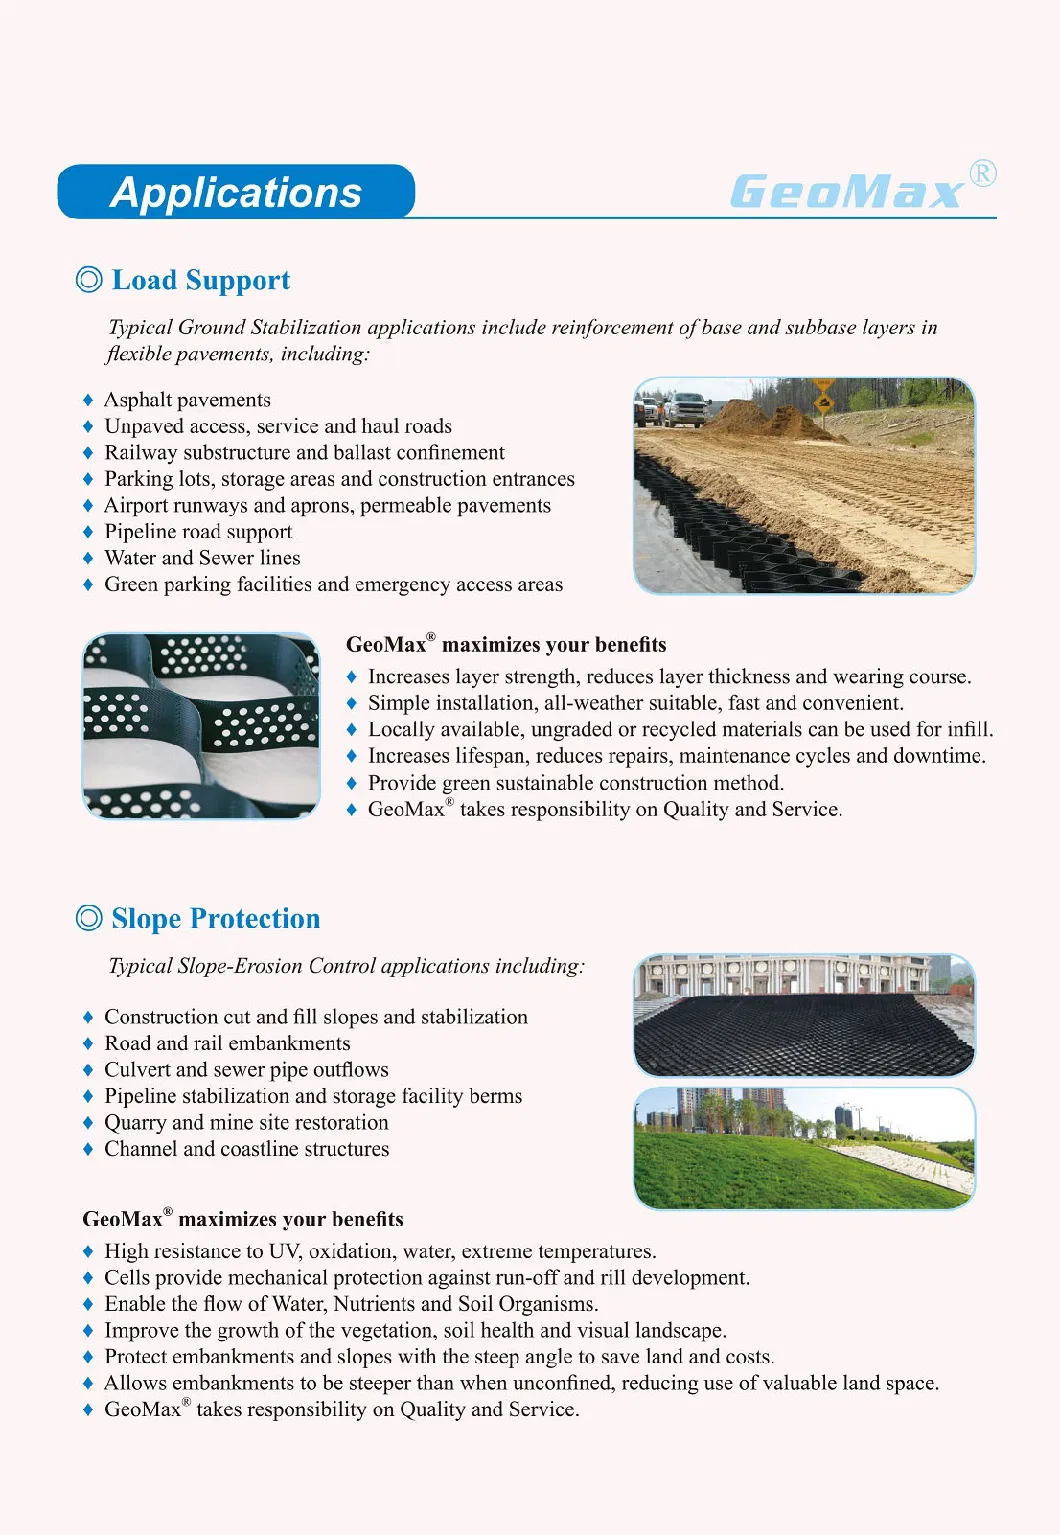 Geomax Geosynthetics Geocells for Unpaved Roads Landscaping Wall Horse Farm for Sale From 1.5 USD USA